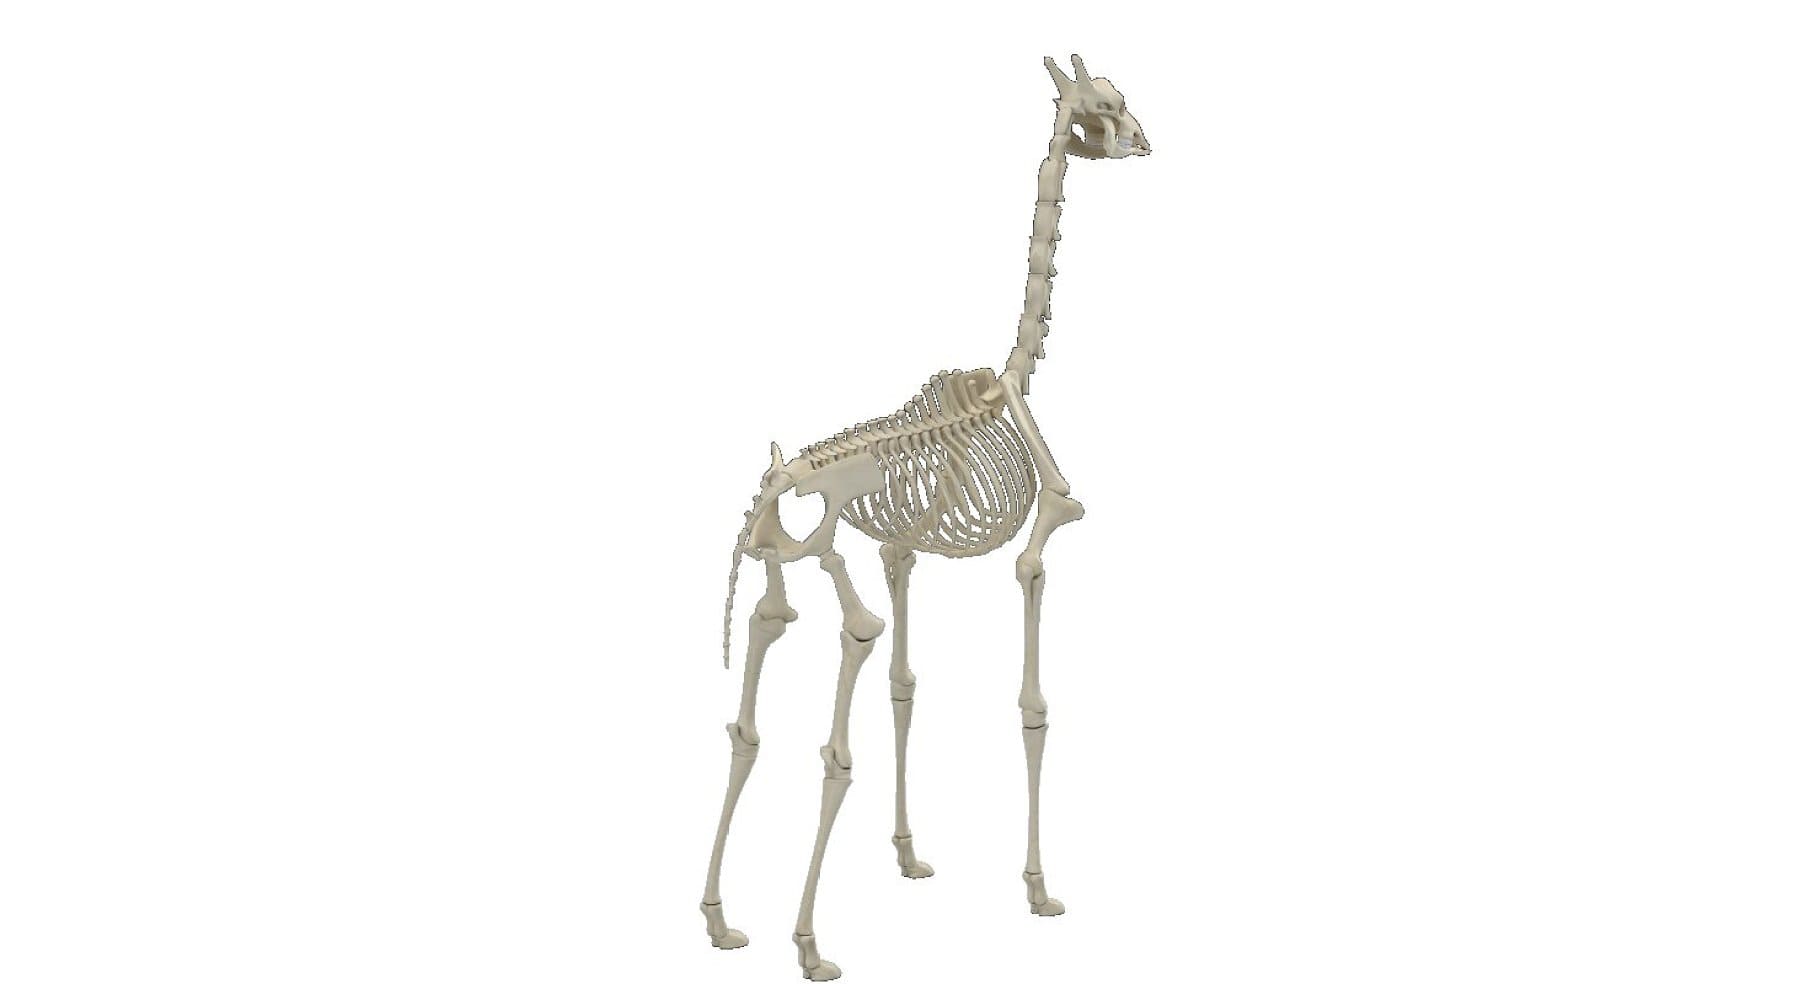 Image of a giraffe skeleton with two horns.